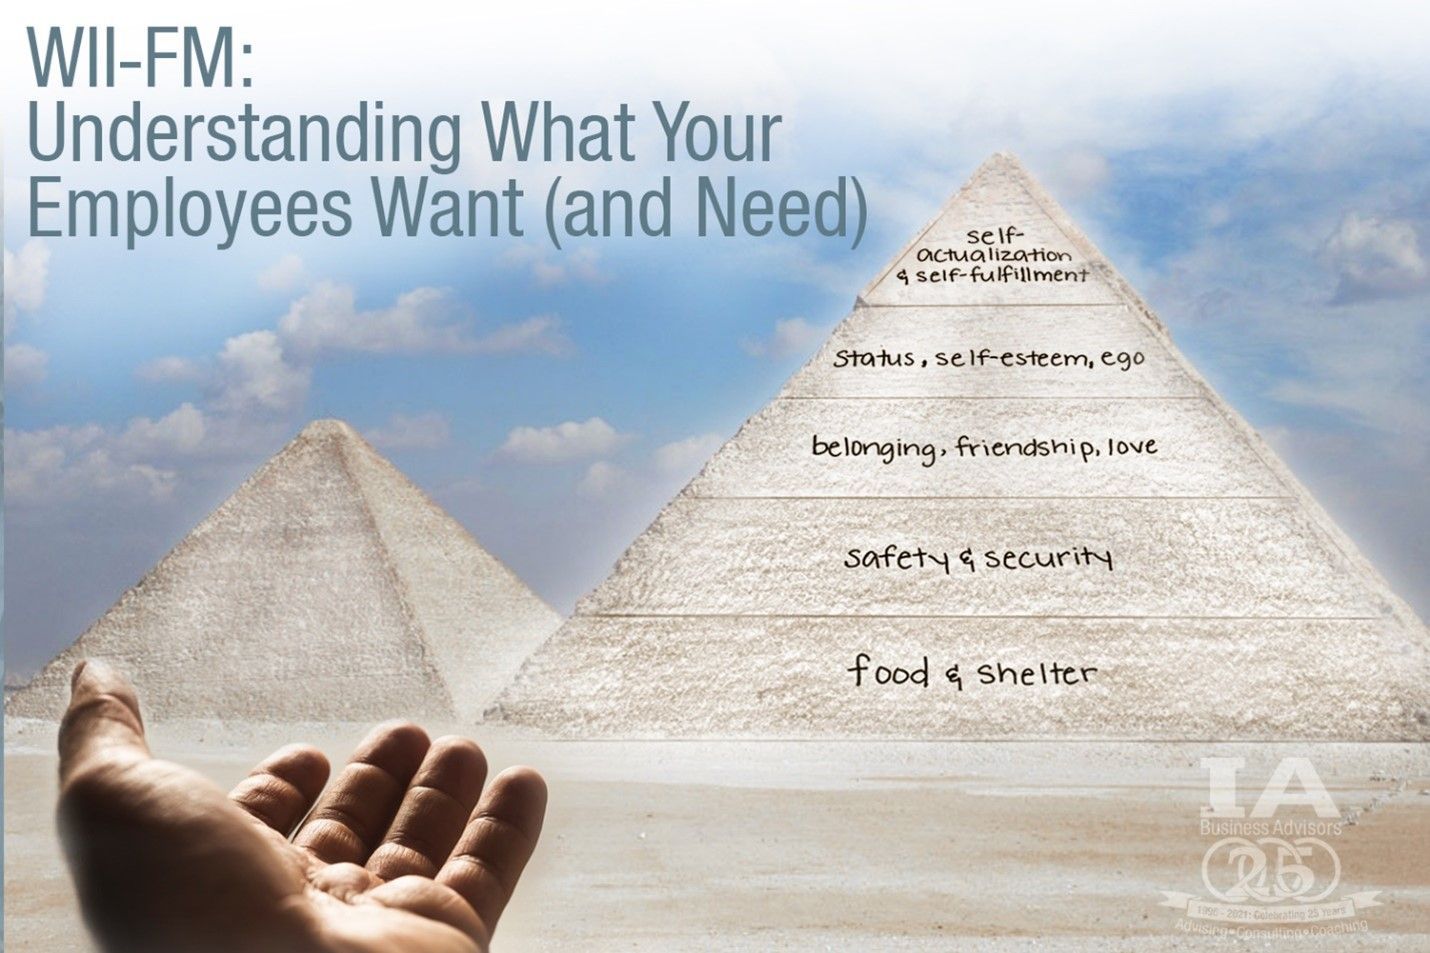 WII-FM: UNDERSTANDING WHAT YOUR EMPLOYEES WANT (AND NEED)